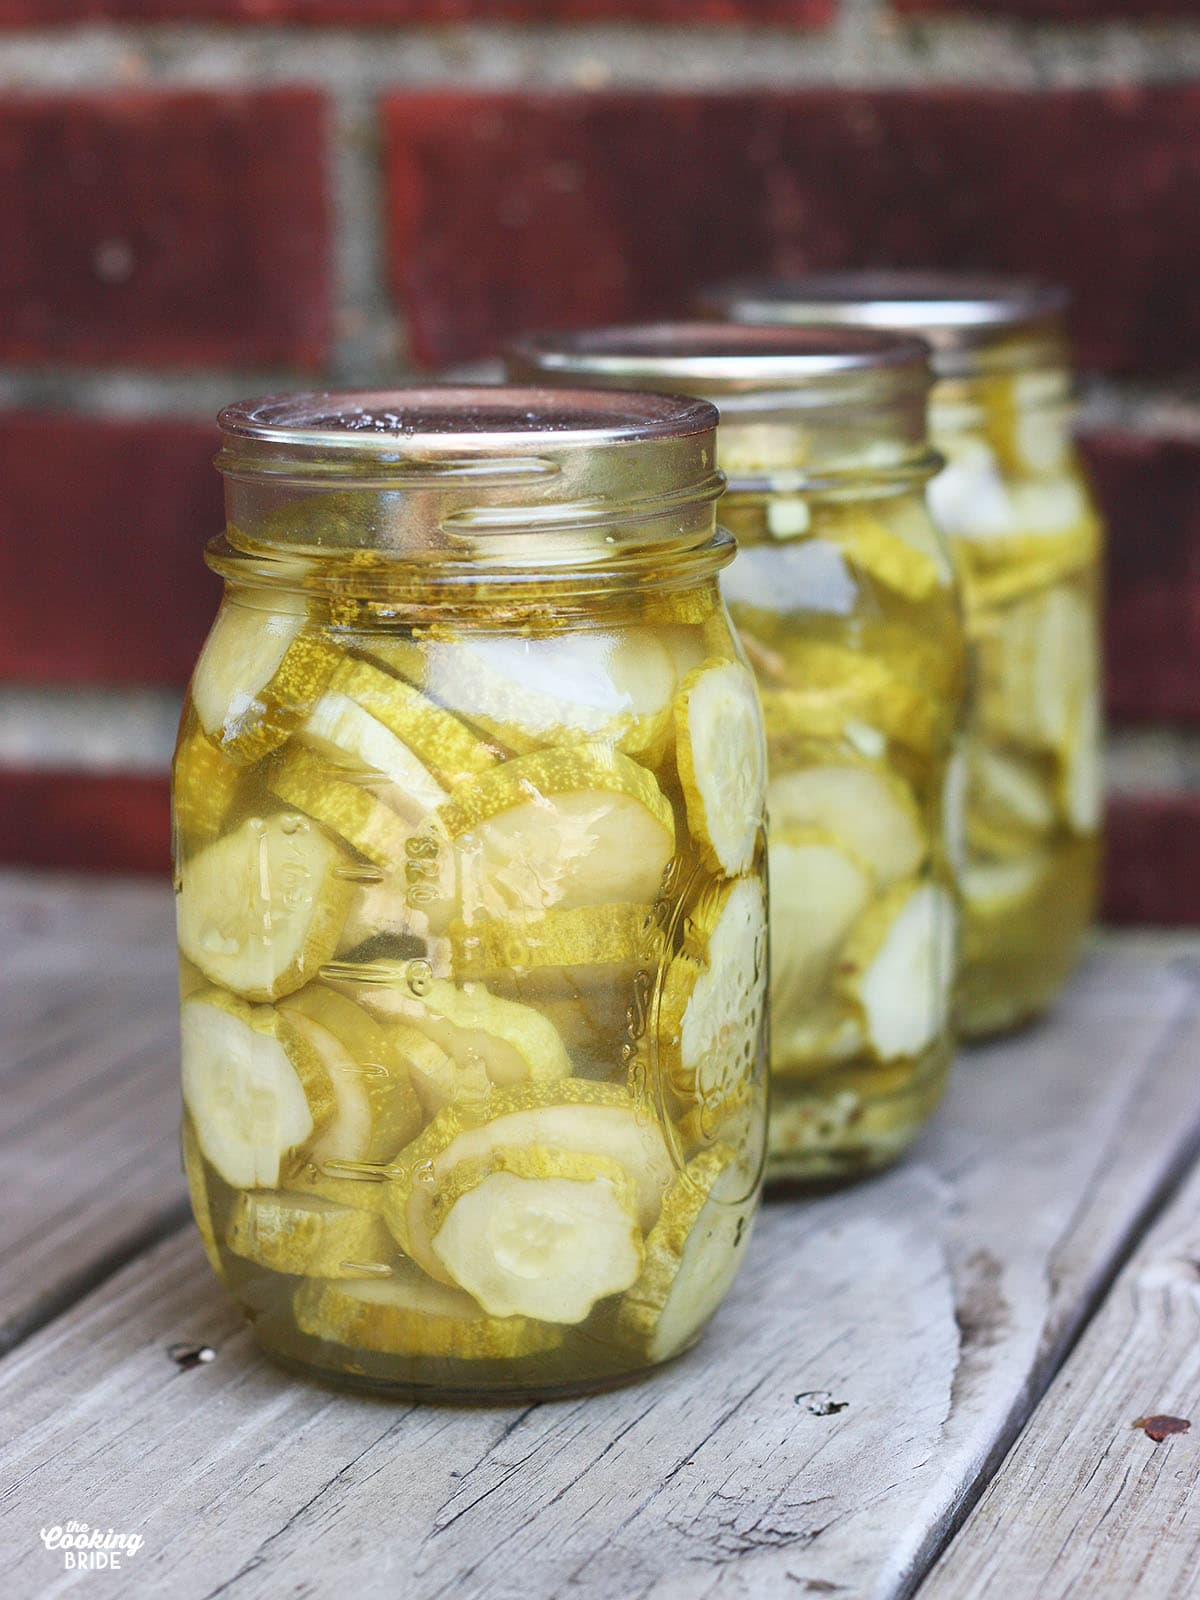 three sealed jars of sliced dill pickles on a worn wooden background with weathered brick in the background